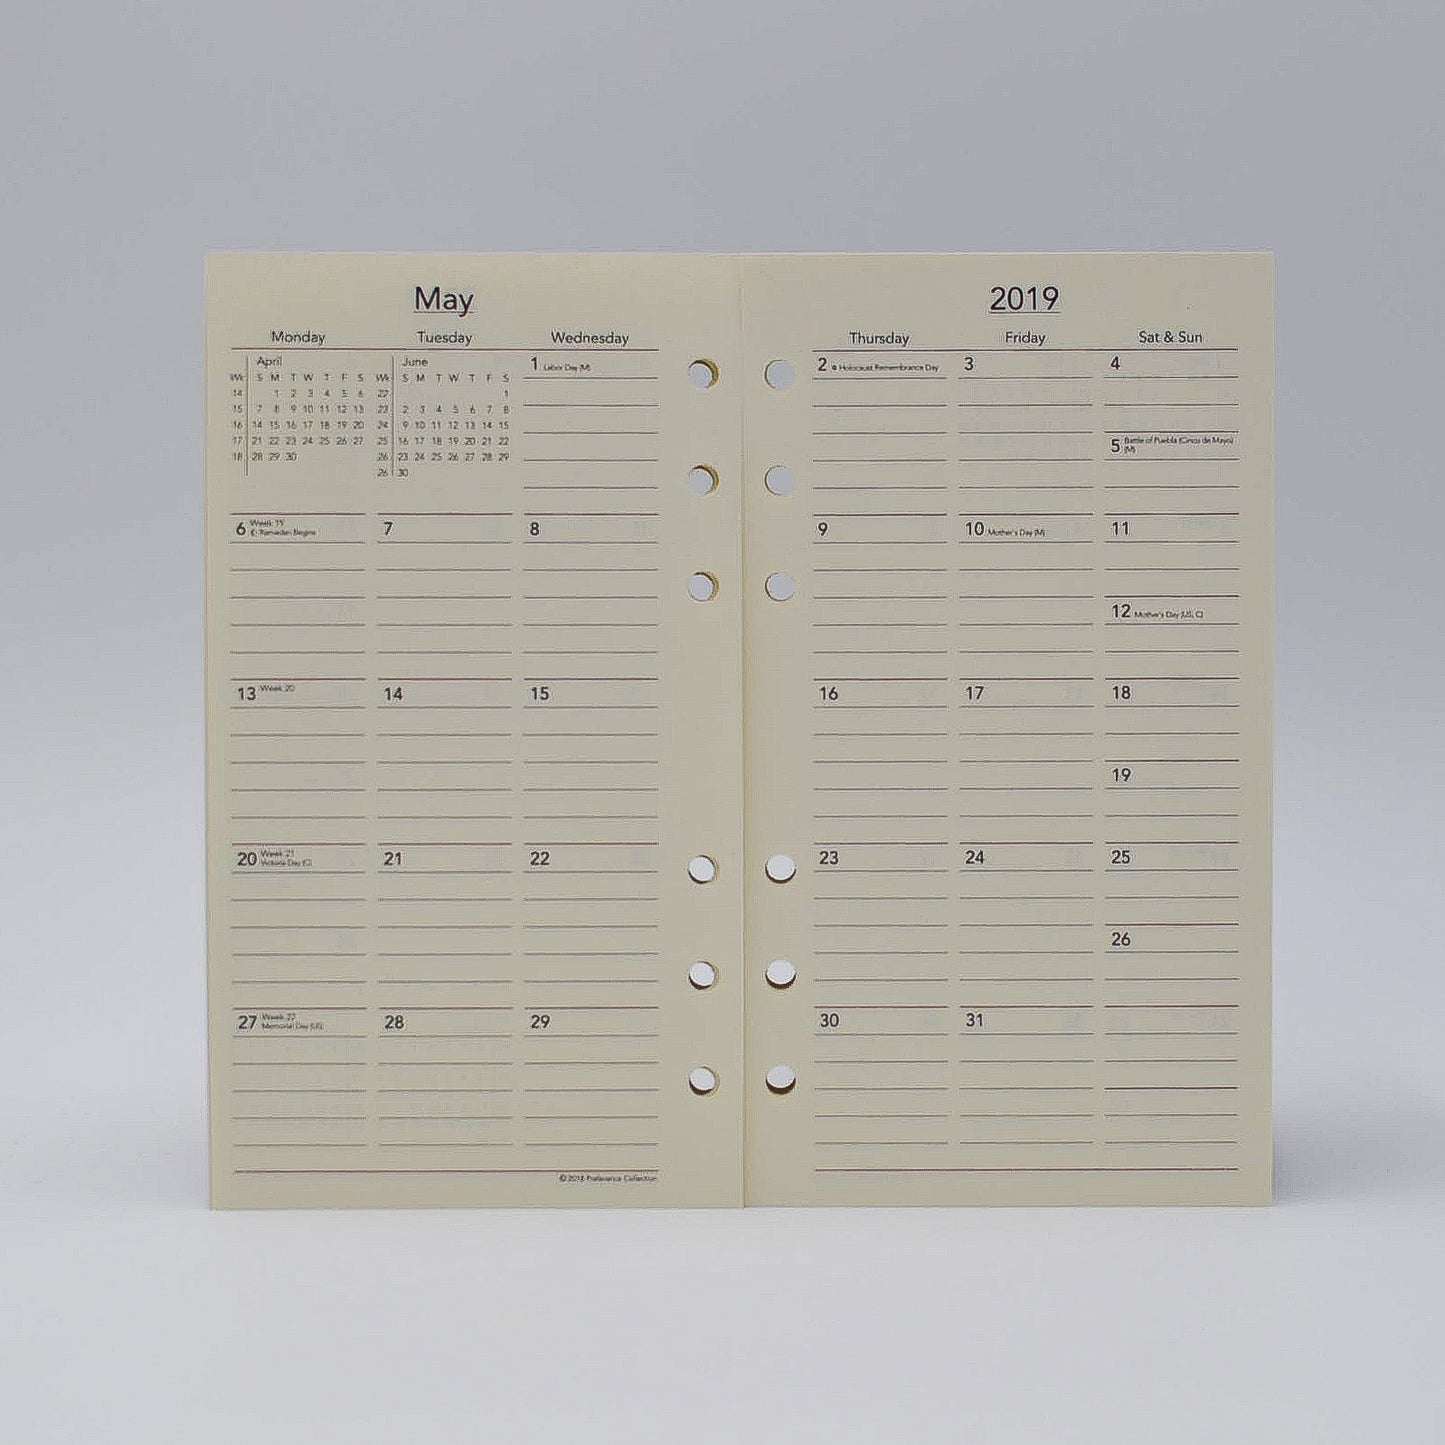 Preference Collection: PD646I 6-3/4x3-3/4 6-hole Planner monthly weekly calendar for 2019 or 2020 ivory loose leaf